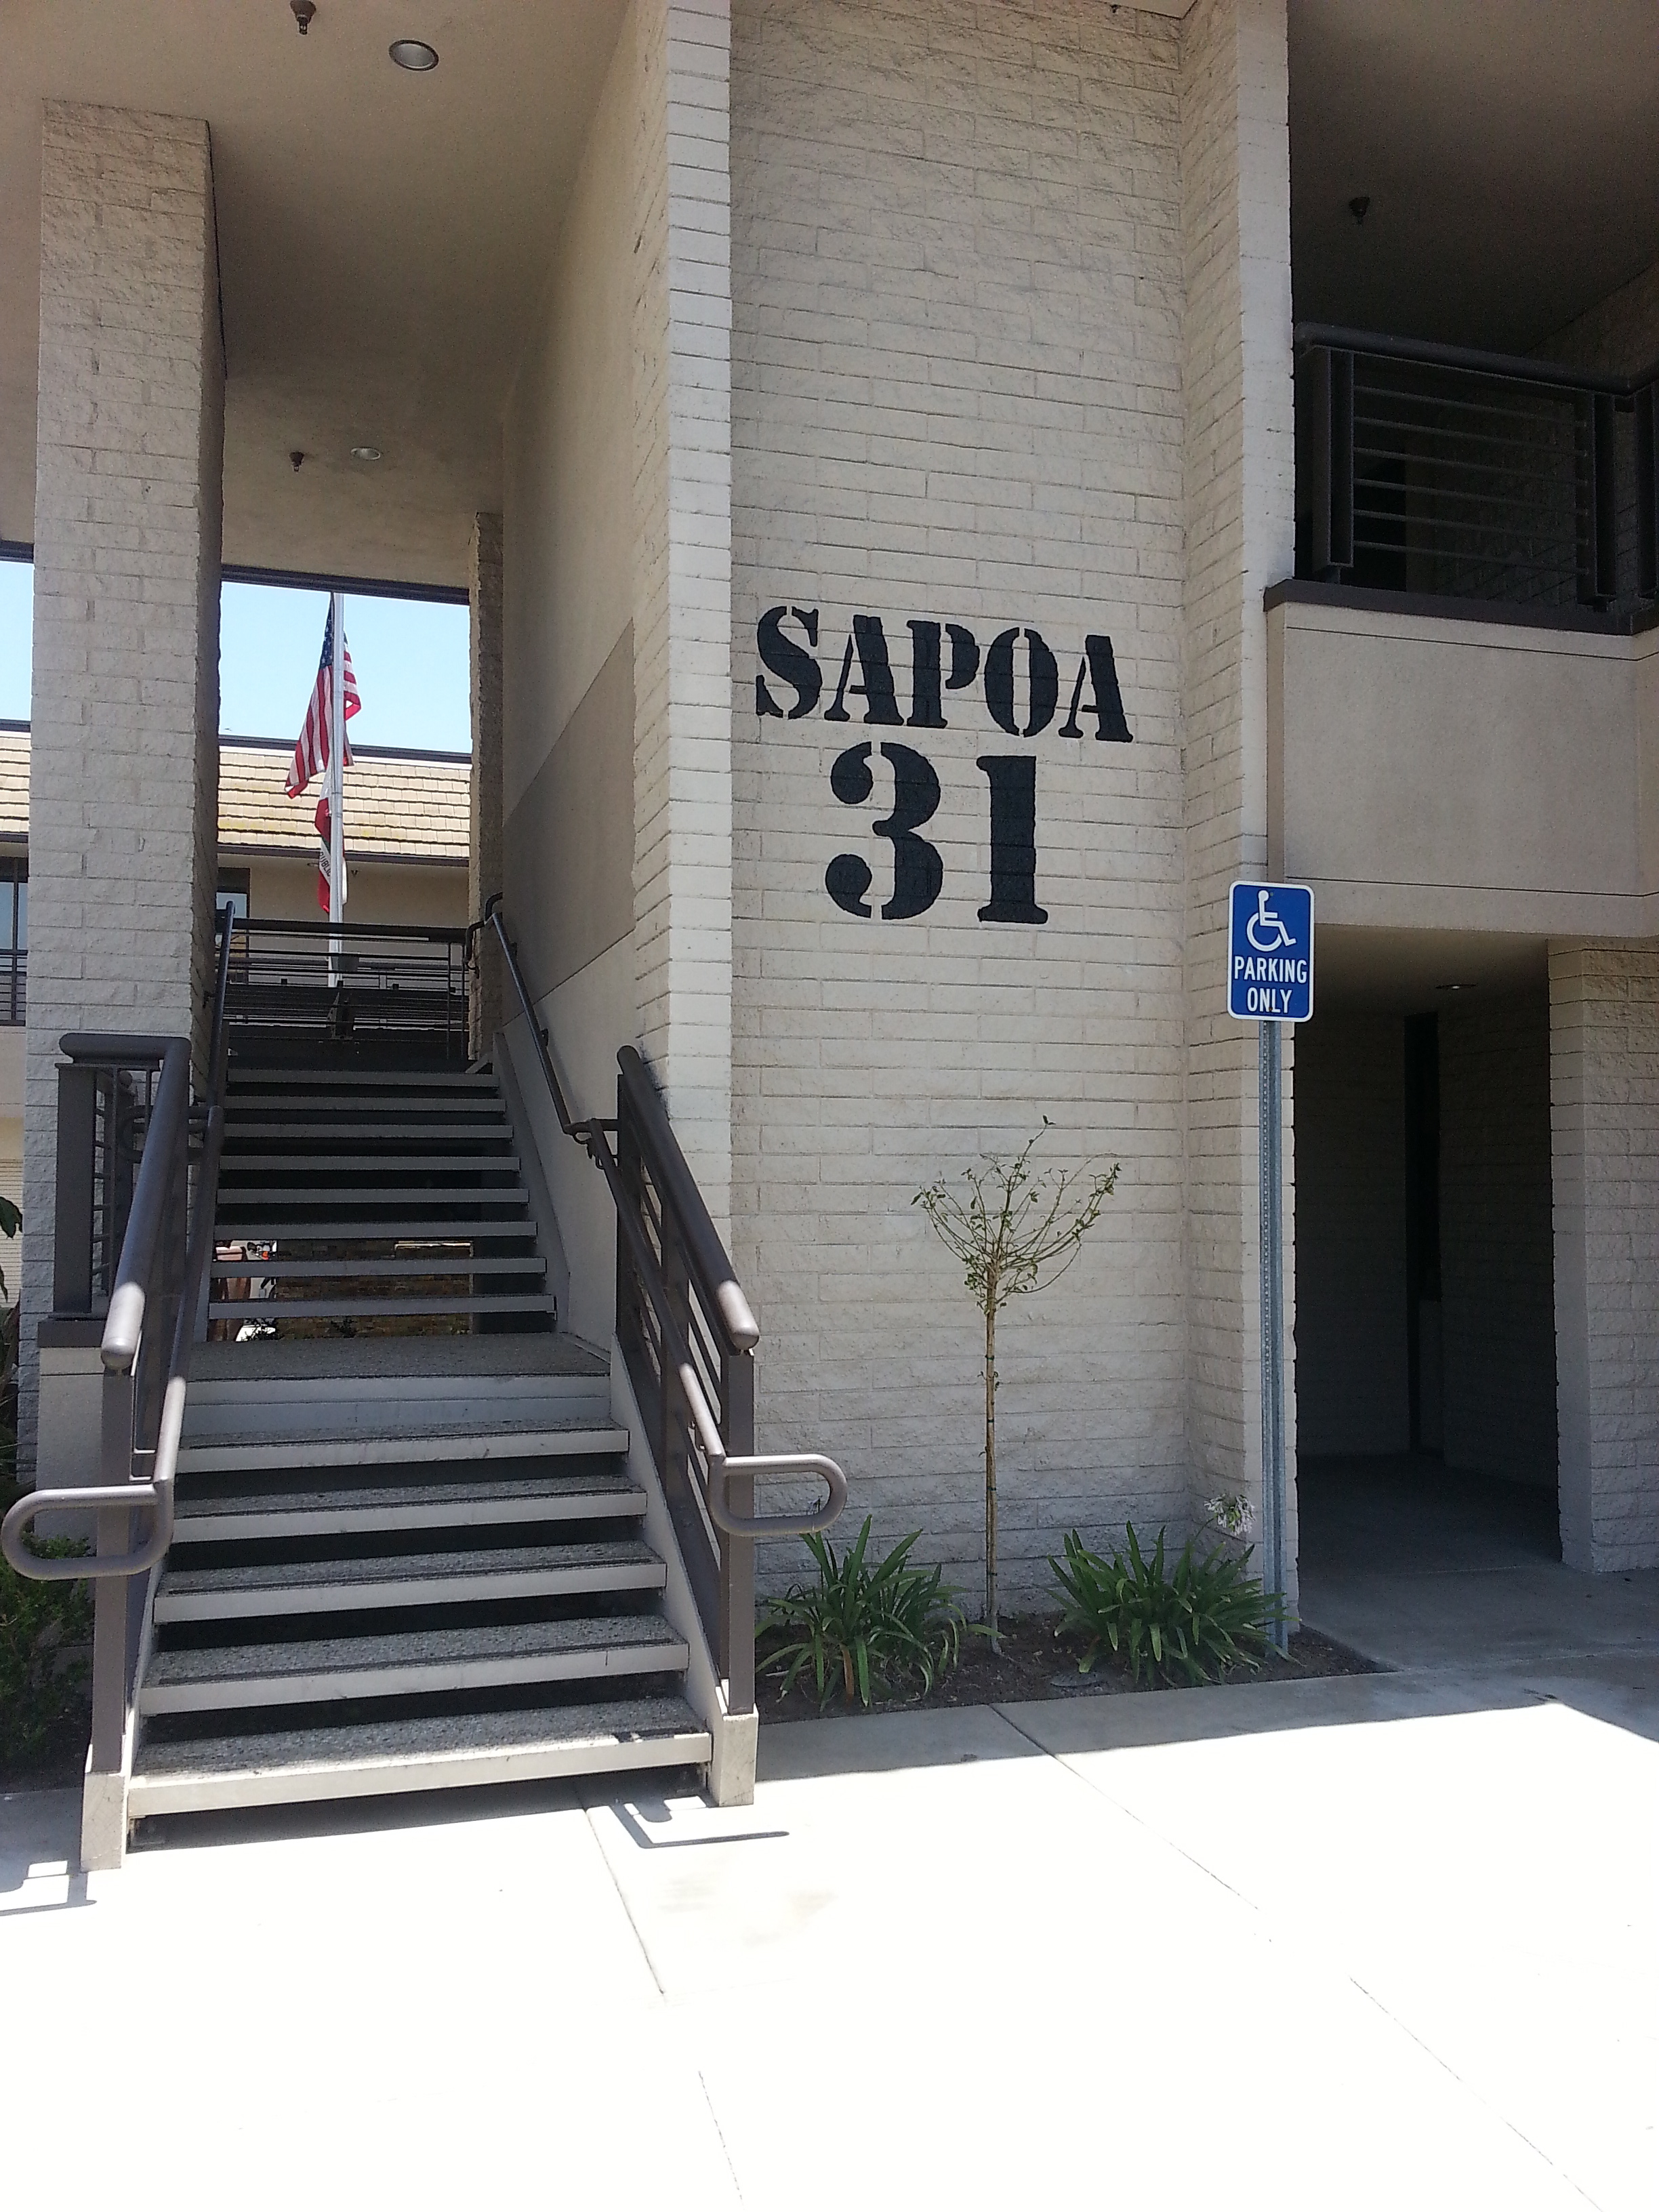 SAPOA exterior hand painted wall graphic